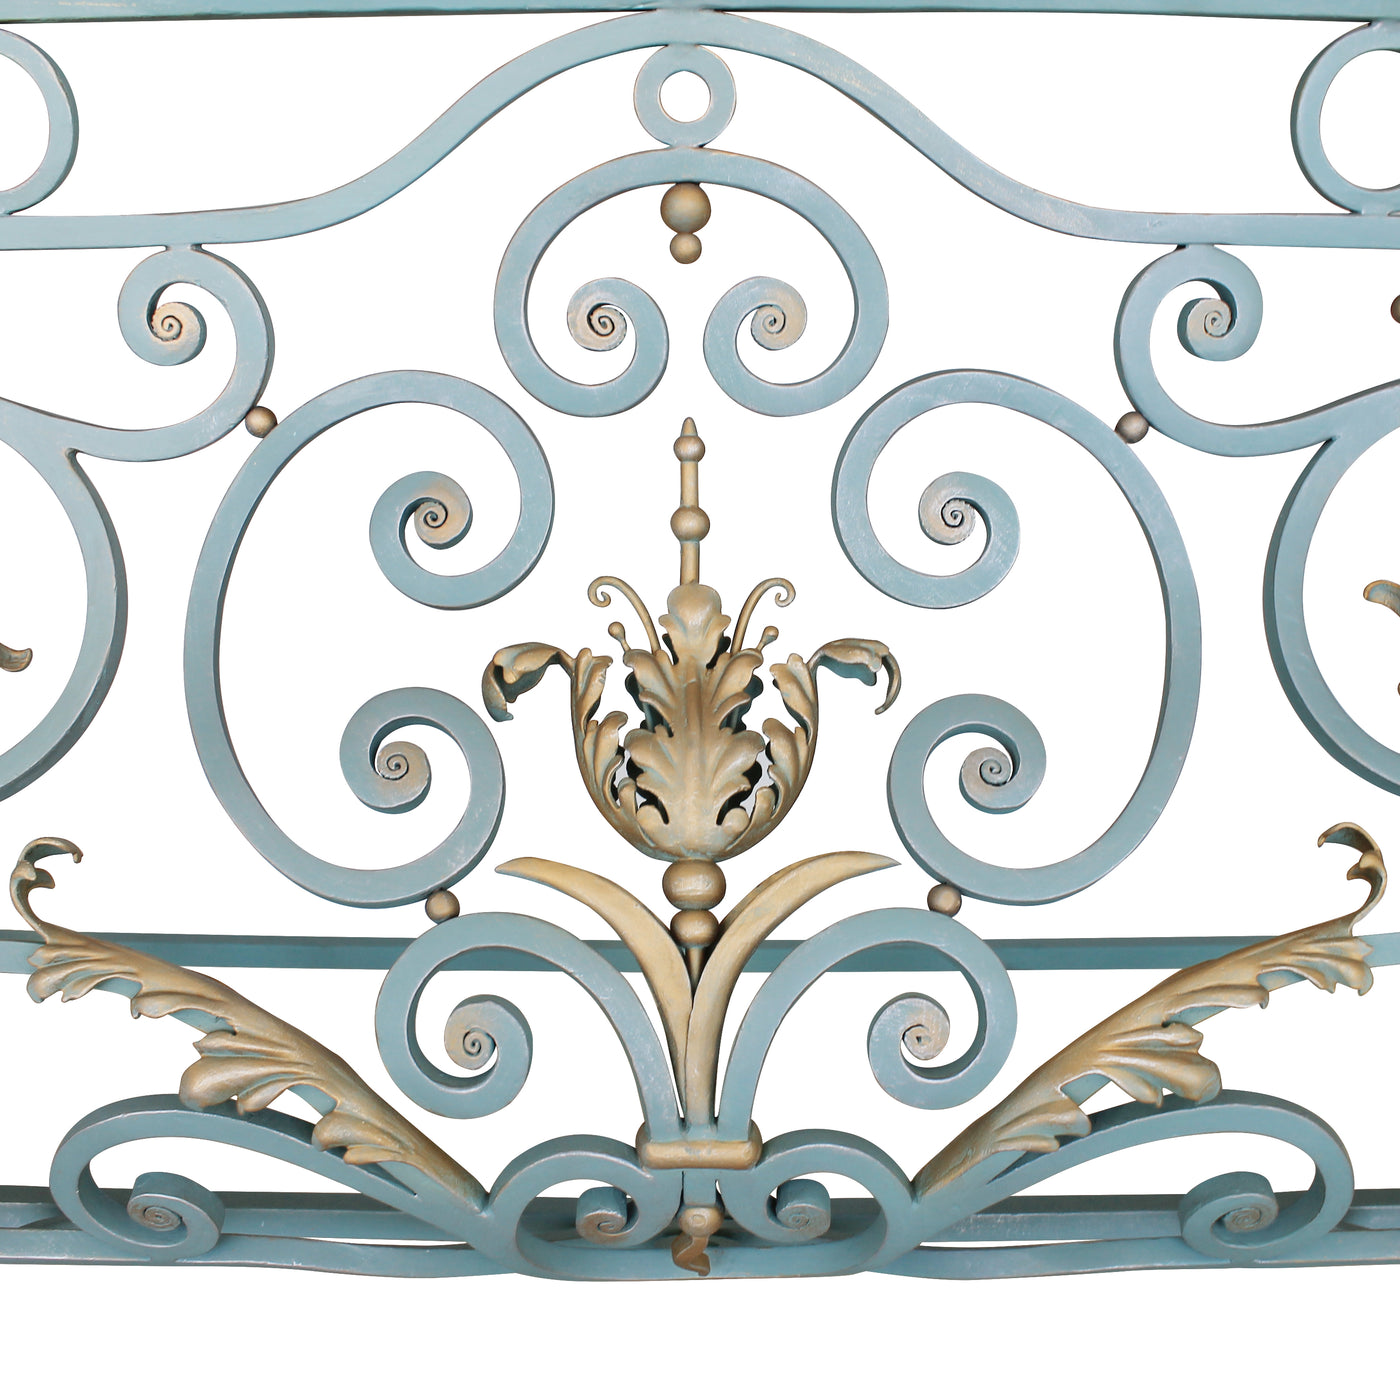 Close up of a classical console base made up of blue wrought iron scrolls and golden leaves